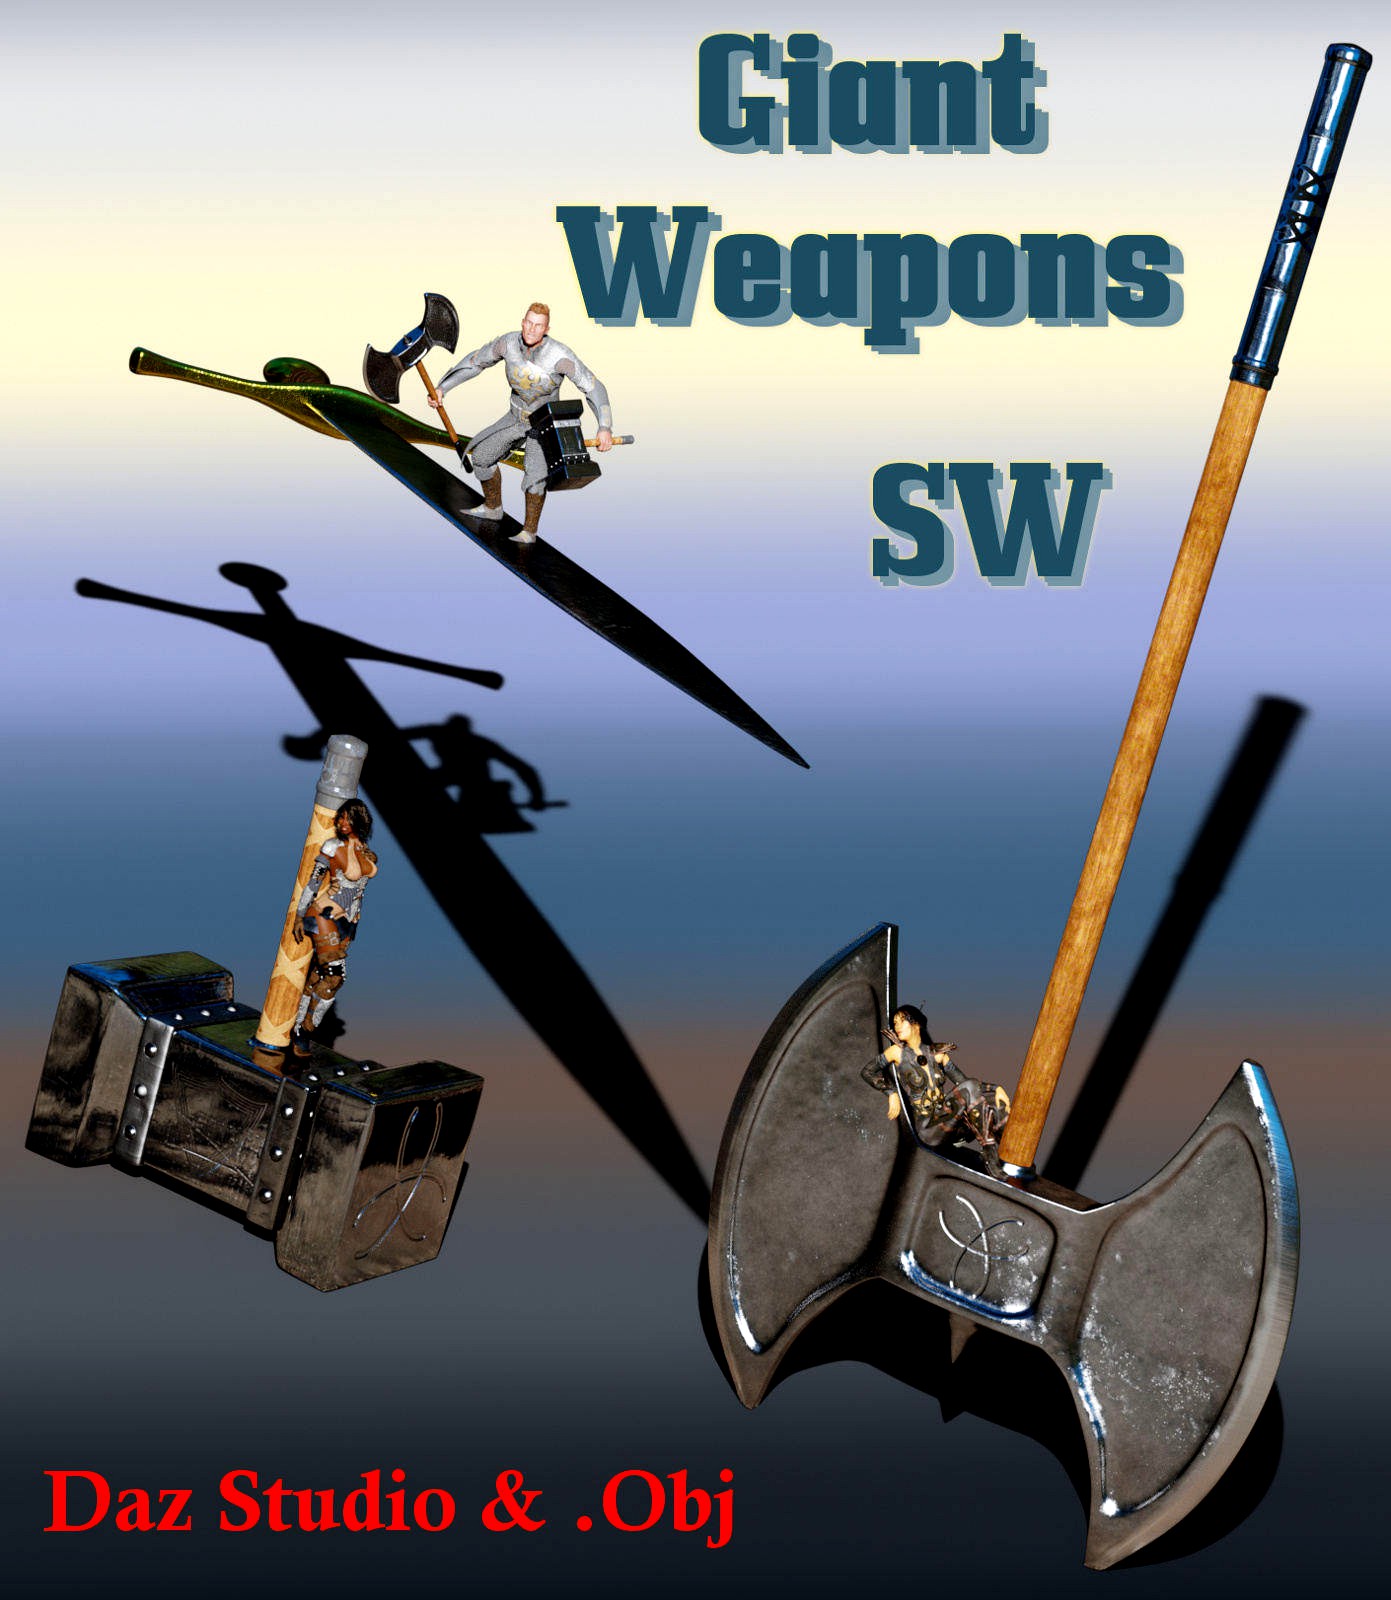 Giant Weapons SW